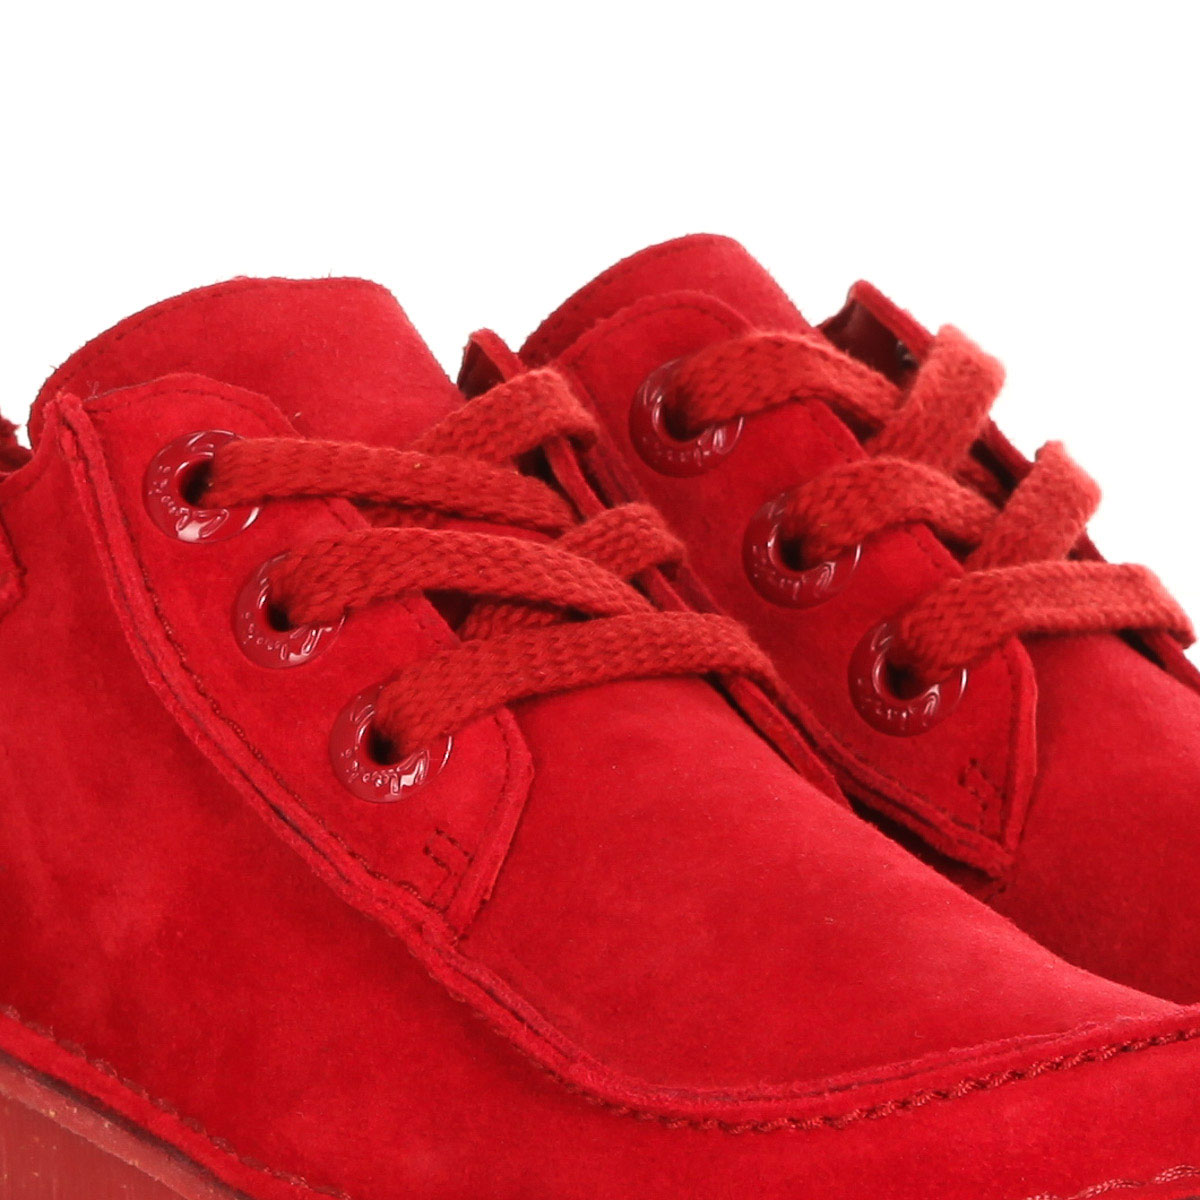 clarks funny dream red